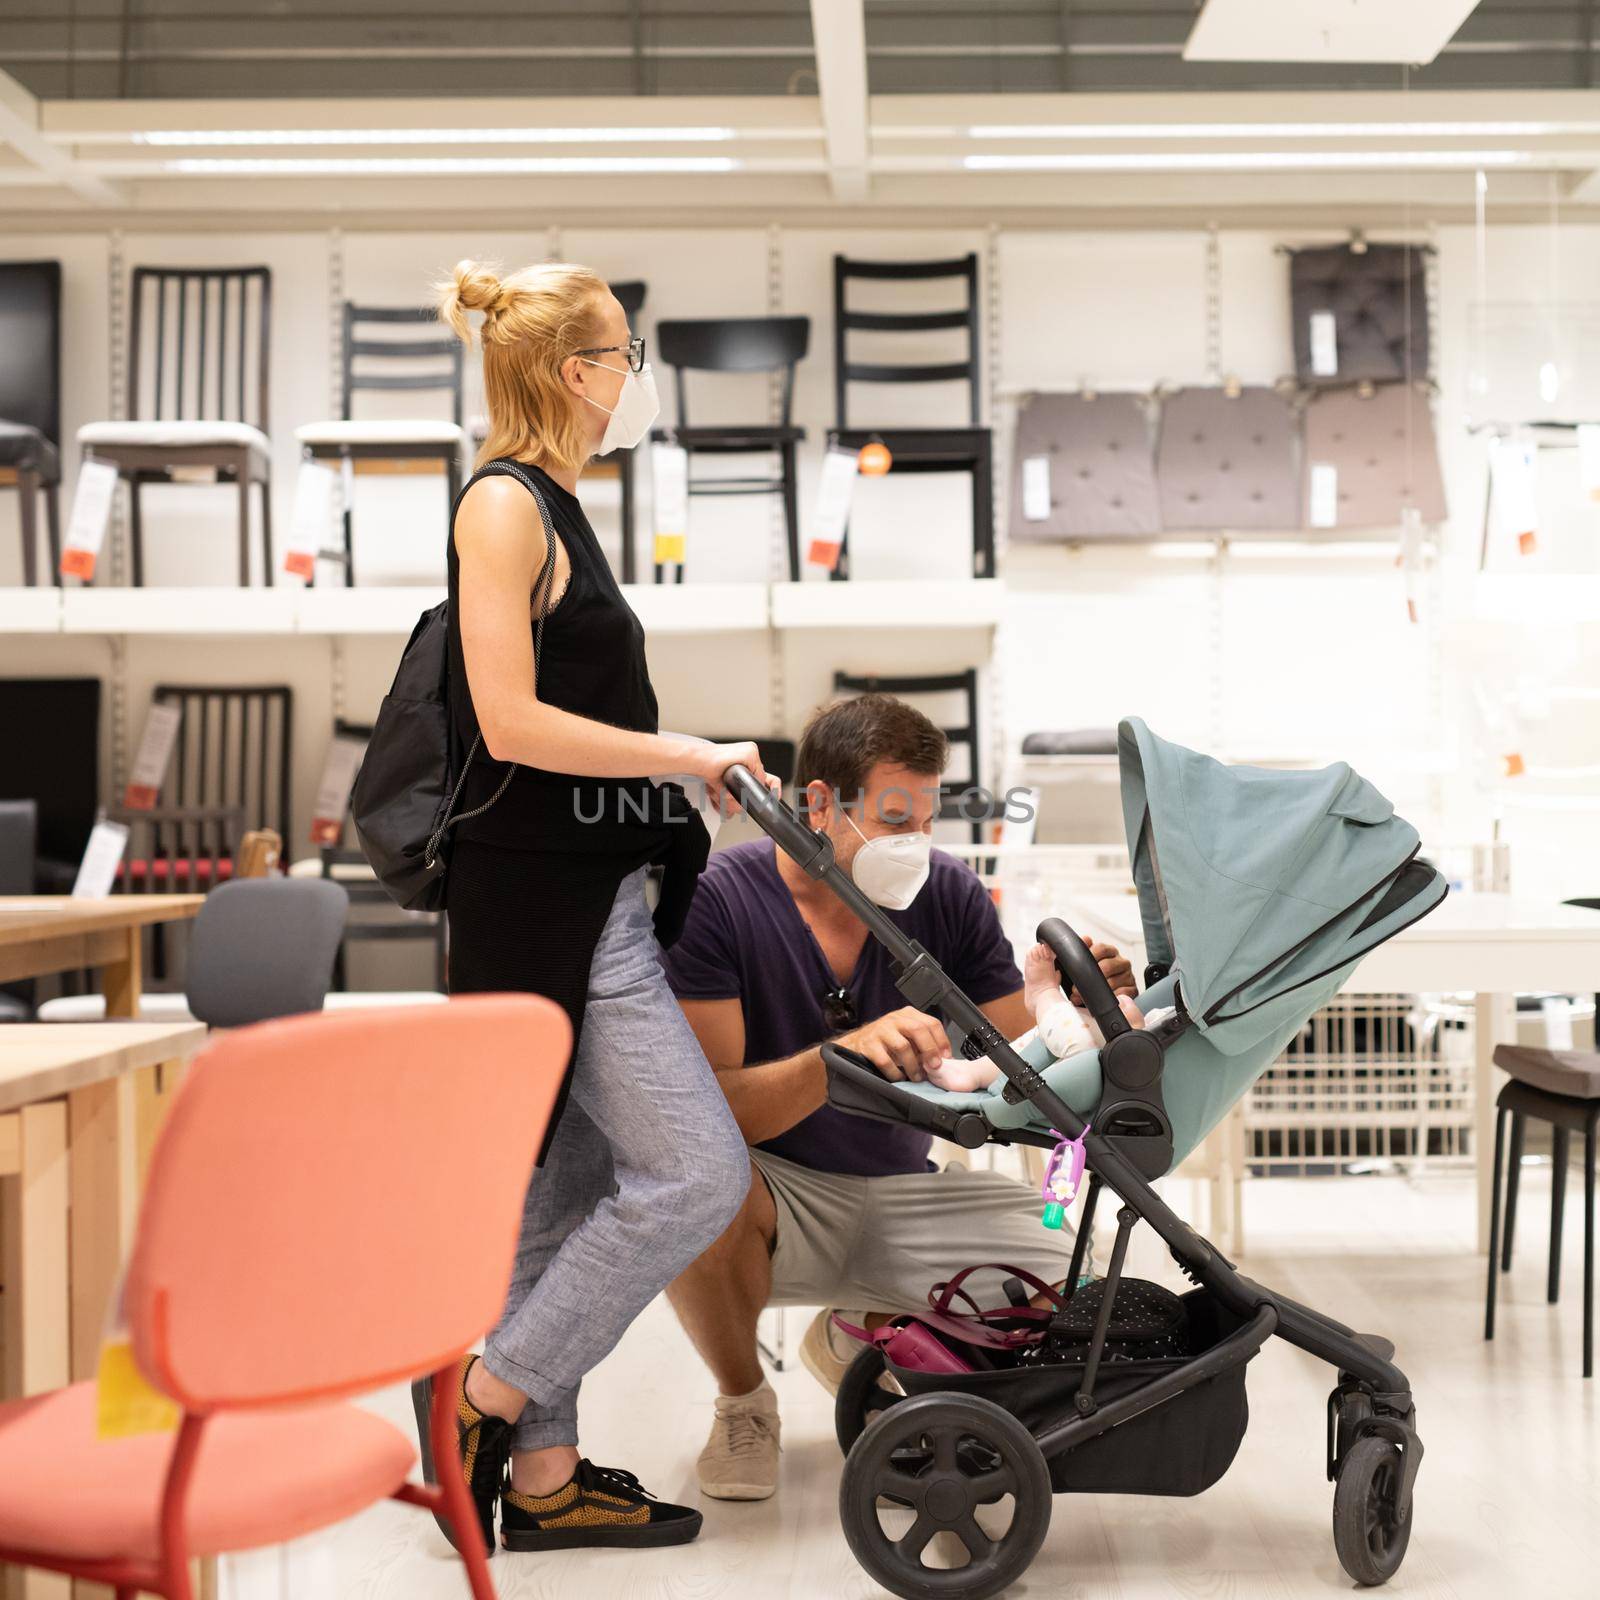 Young couple with newborn in stroller shopping at retail furniture and home accessories store wearing protective medical face mask to prevent spreading of corona virus when shops reopen by kasto